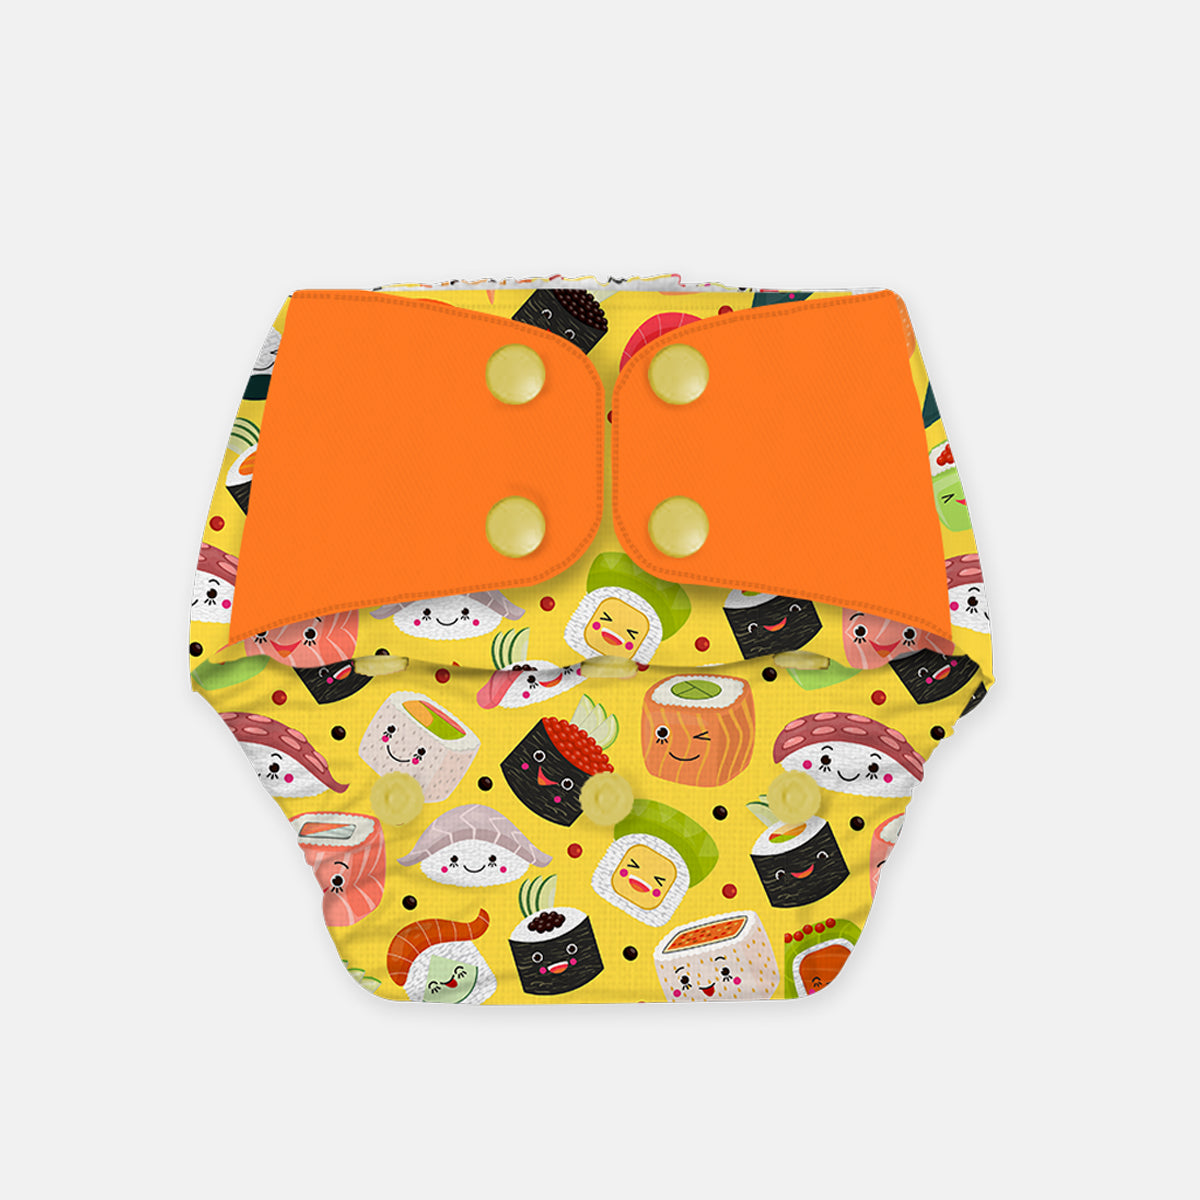 Regular Cloth Diapers (No inserts included)